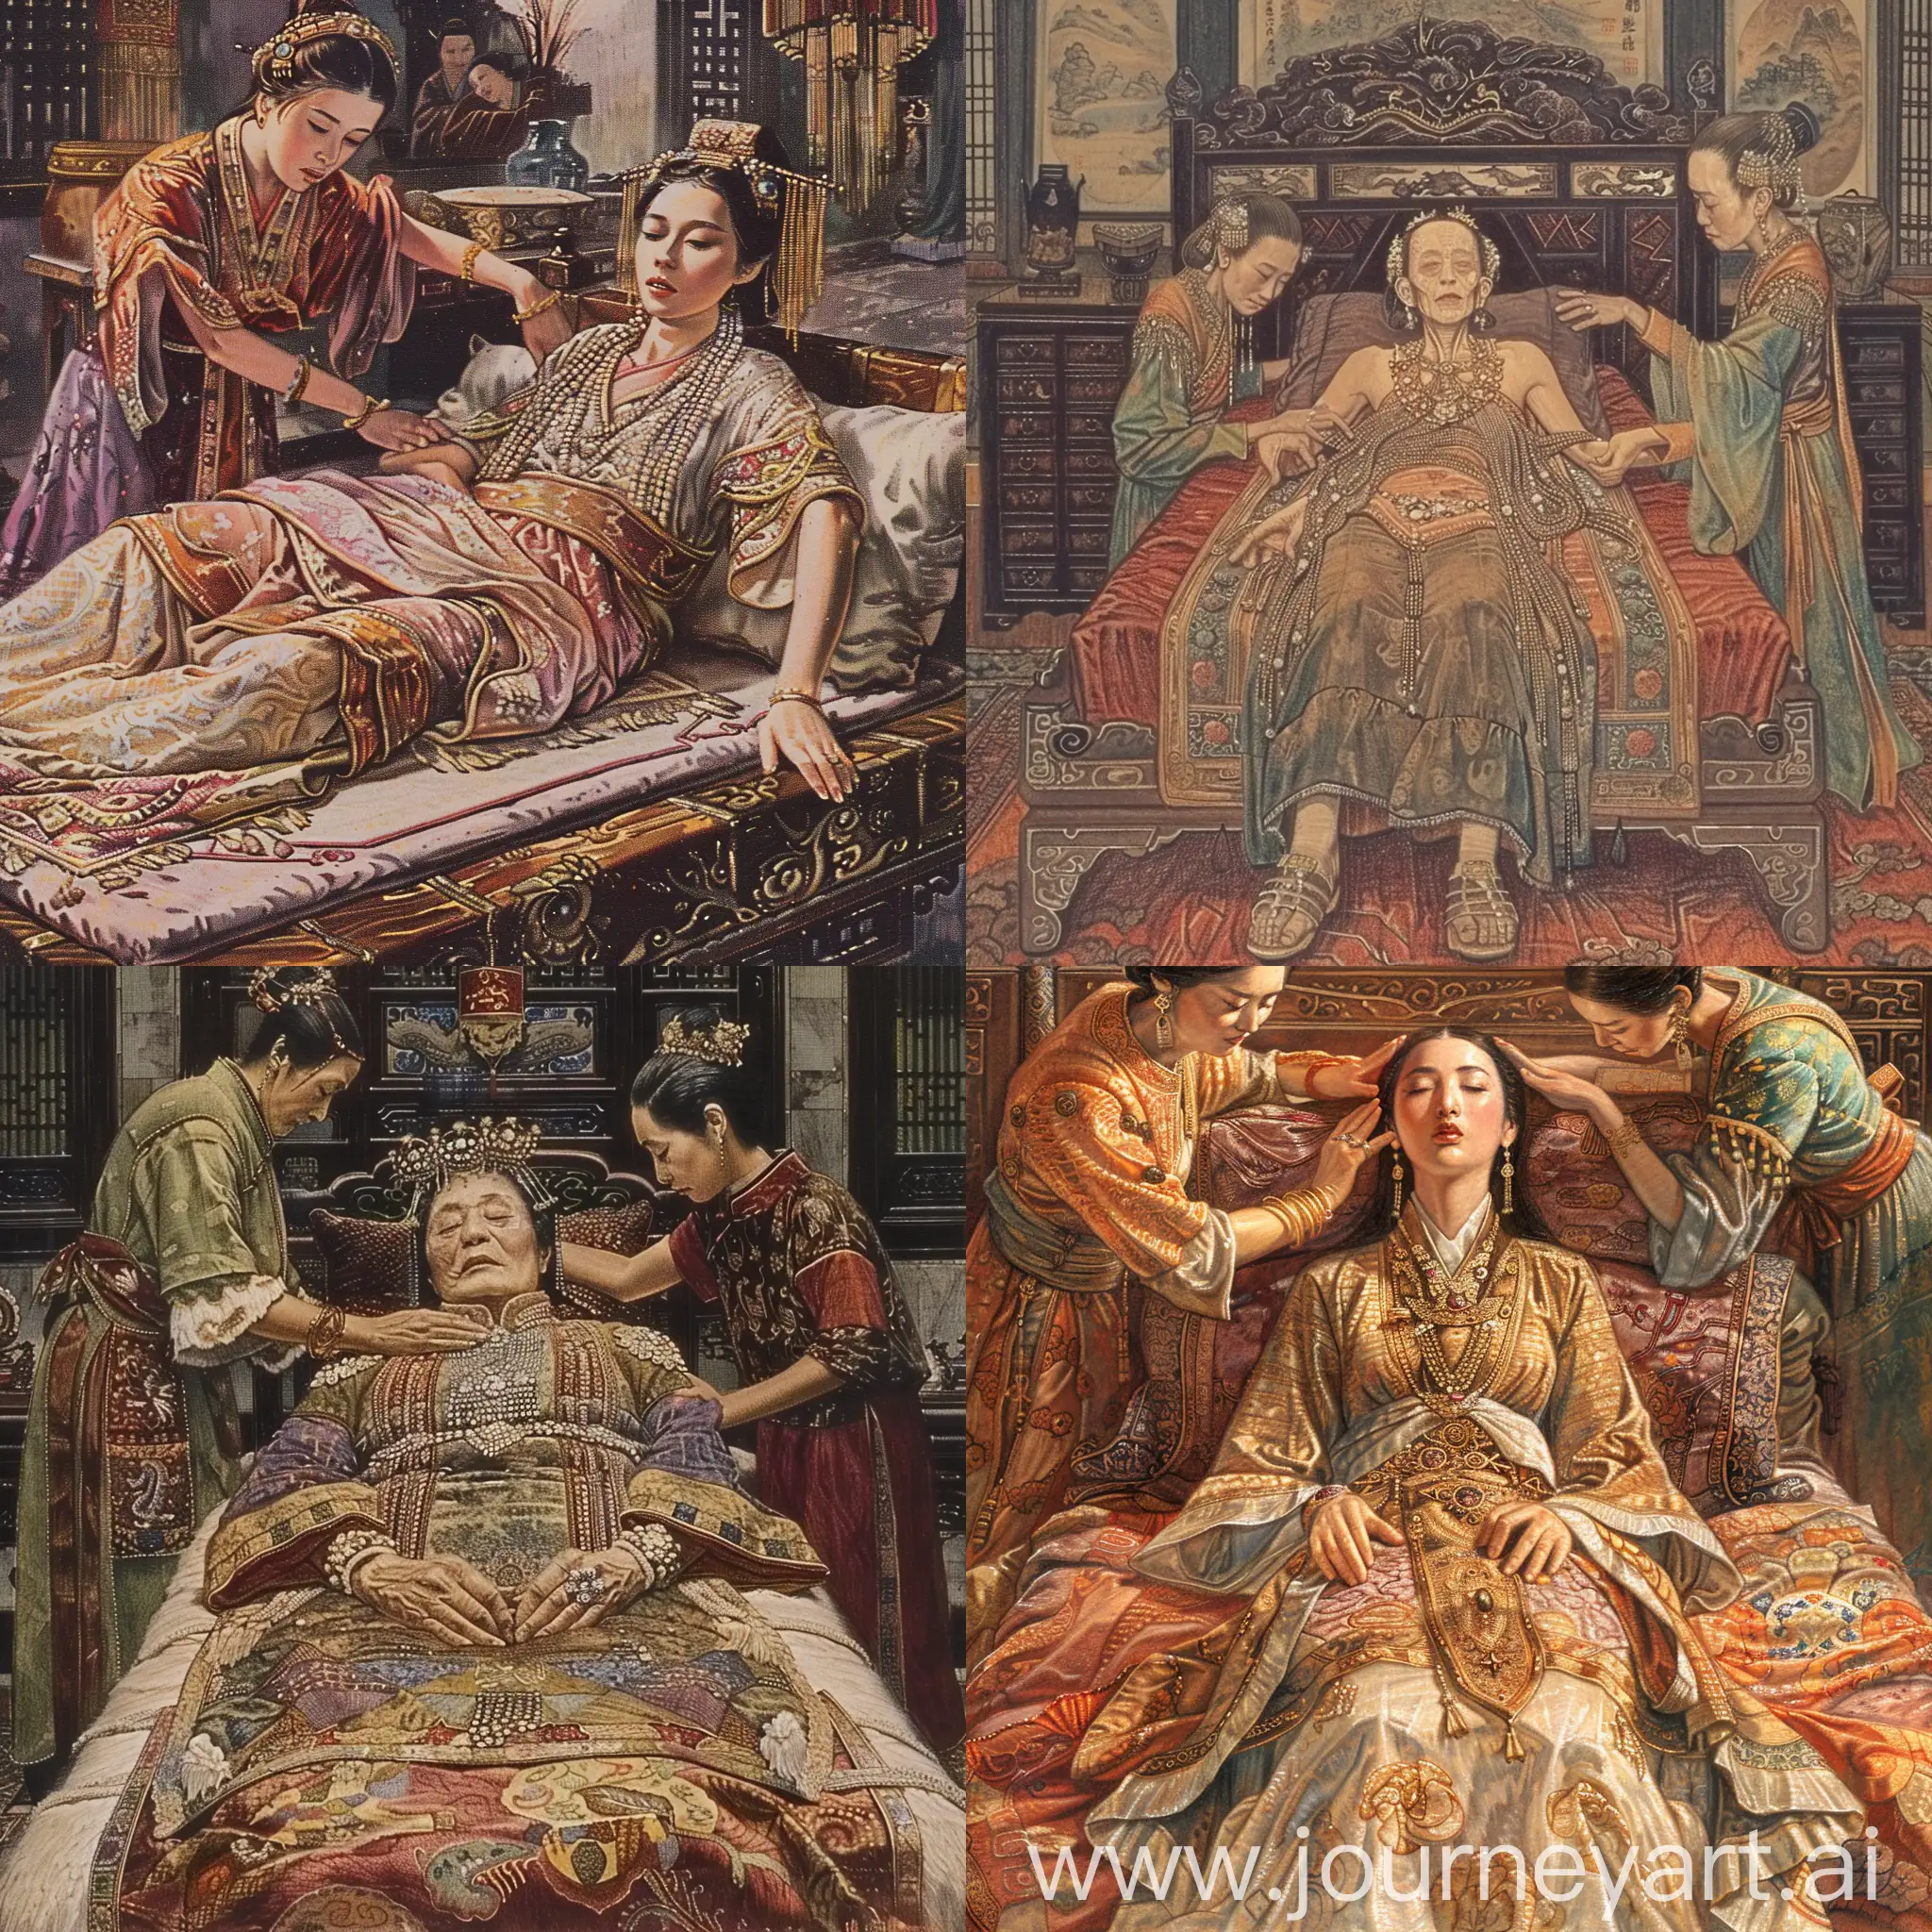 Frail-Chinese-Empress-Receiving-Royal-Care-on-Magnificent-Bed